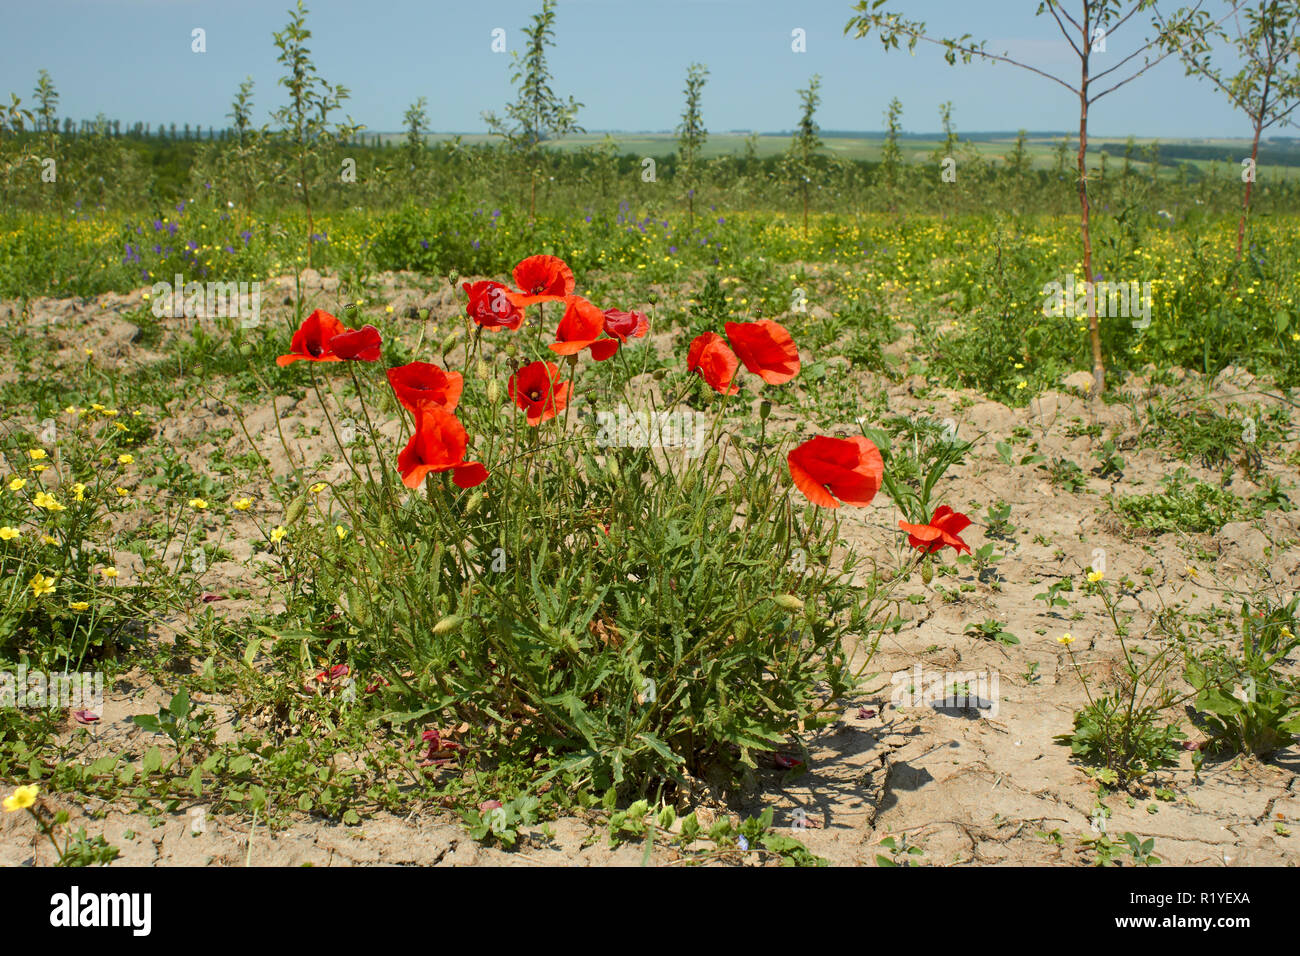 Rapid flowering of red poppy plants on the edge of field in summertime Stock Photo